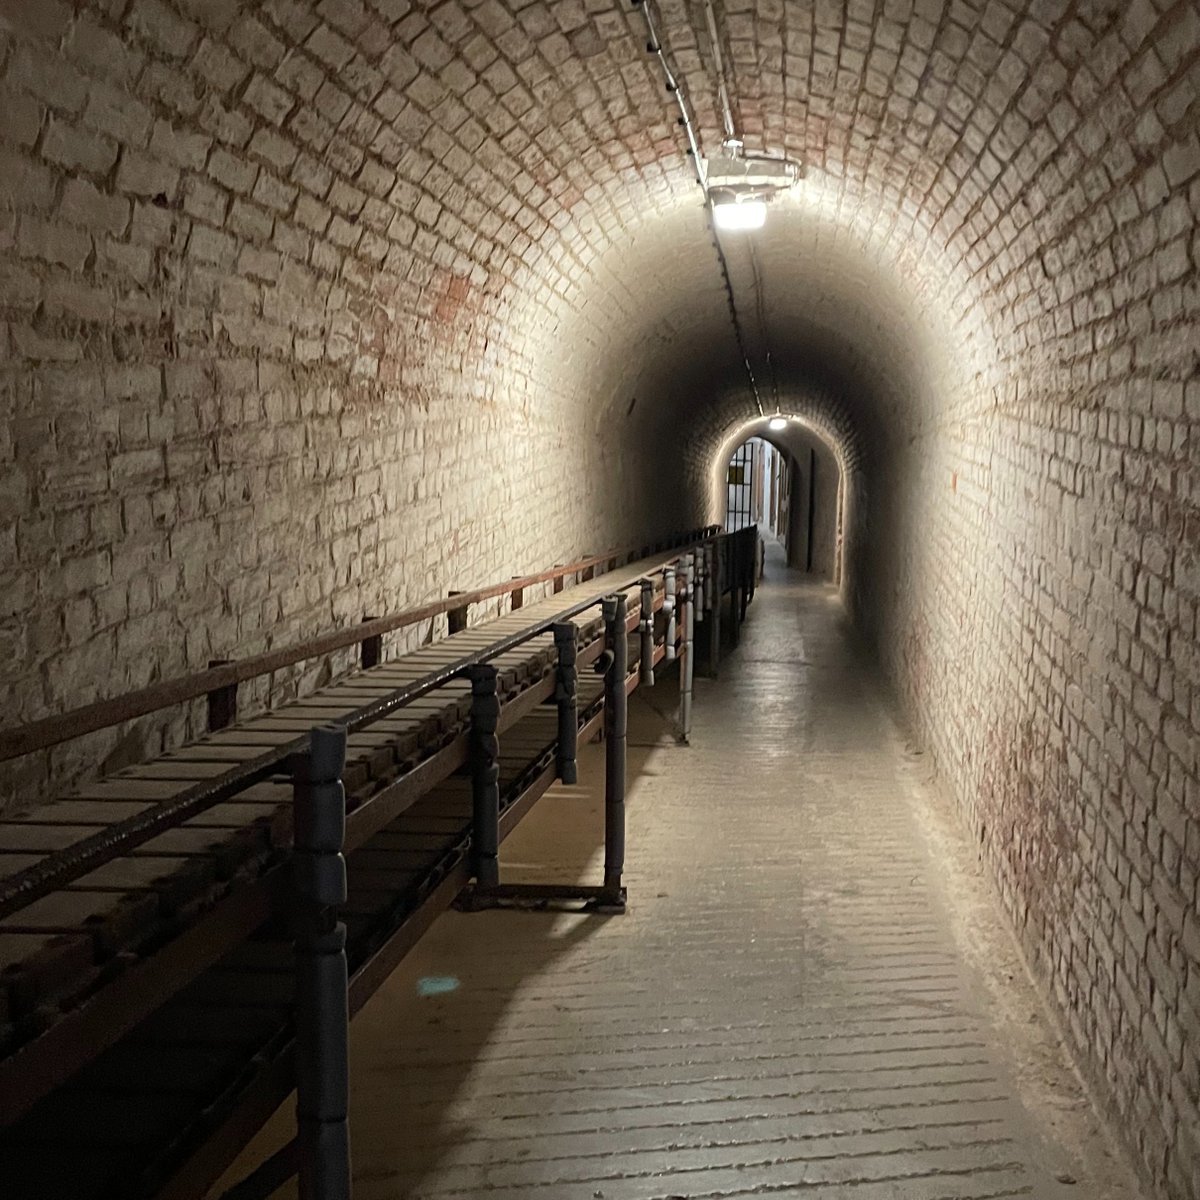 Looking for a free day out with the children this weekend? Visit Fort Nelson.

Let your adventurers explore our underground tunnel, walk the ramparts and discover the history of artillery in our museum galleries.

#free #museum #history #portsmouth #hantsdaysout #fareham #tunnel